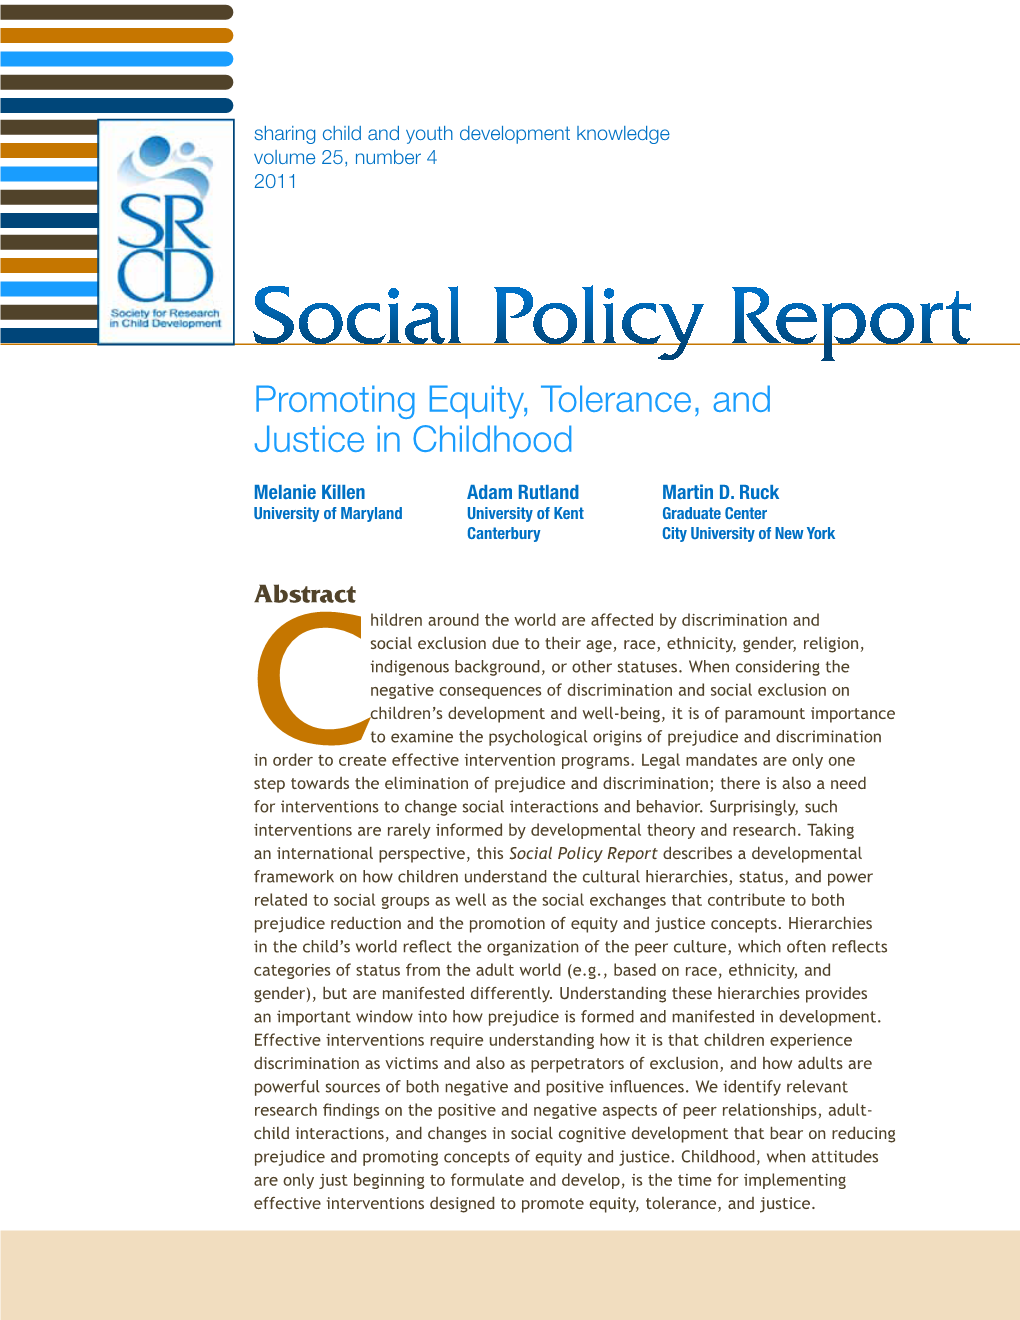 Social Policy Report Promoting Equity, Tolerance, and Justice in Childhood